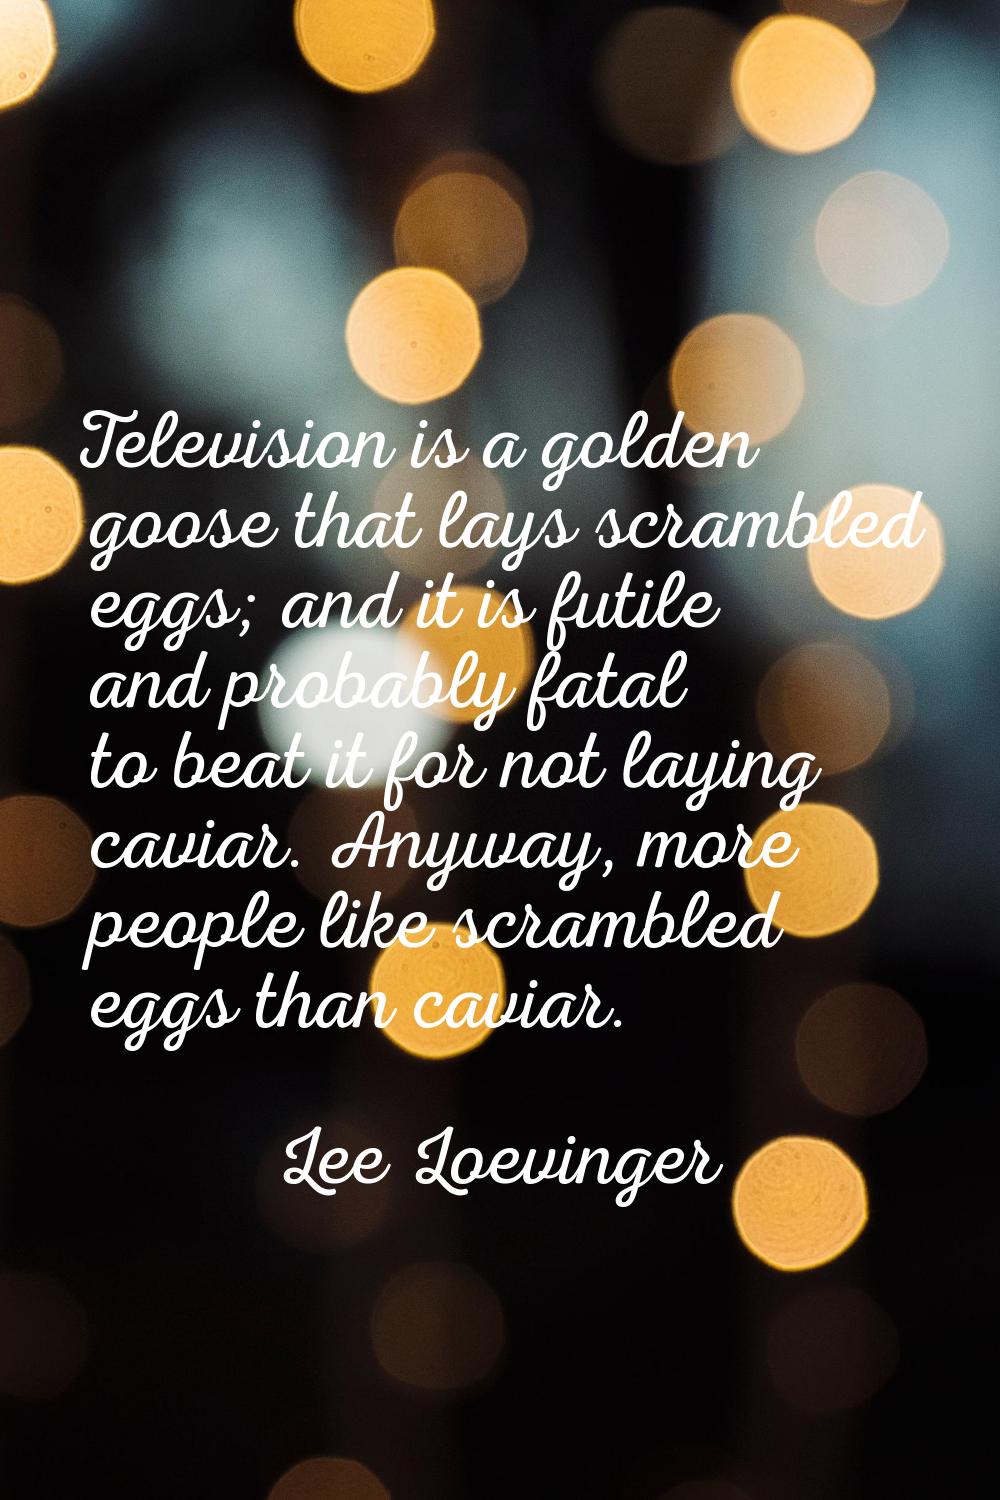 Television is a golden goose that lays scrambled eggs; and it is futile and probably fatal to beat 